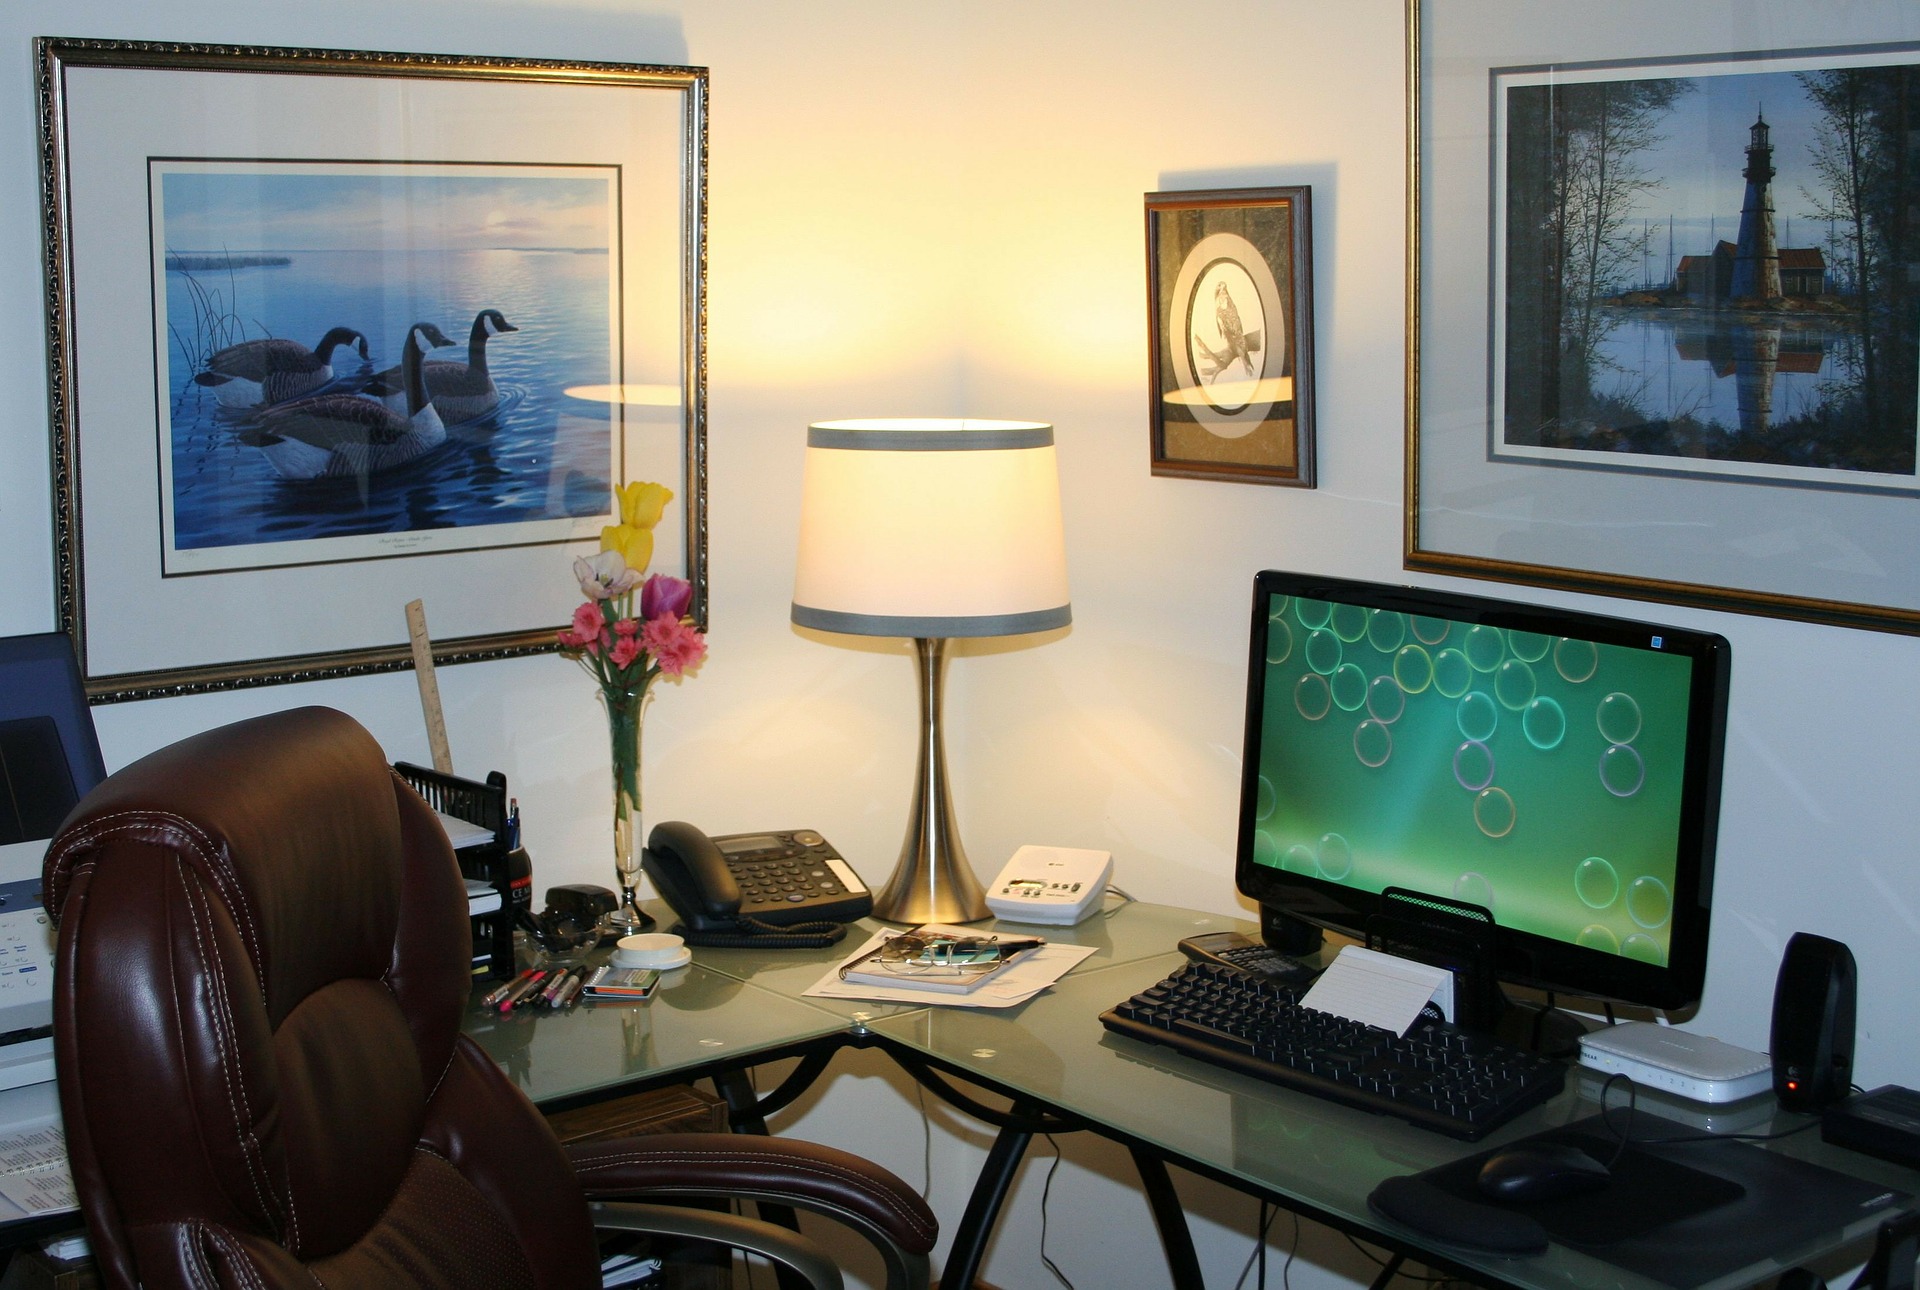 Let’s discuss some tips on how to create a productive home workspace